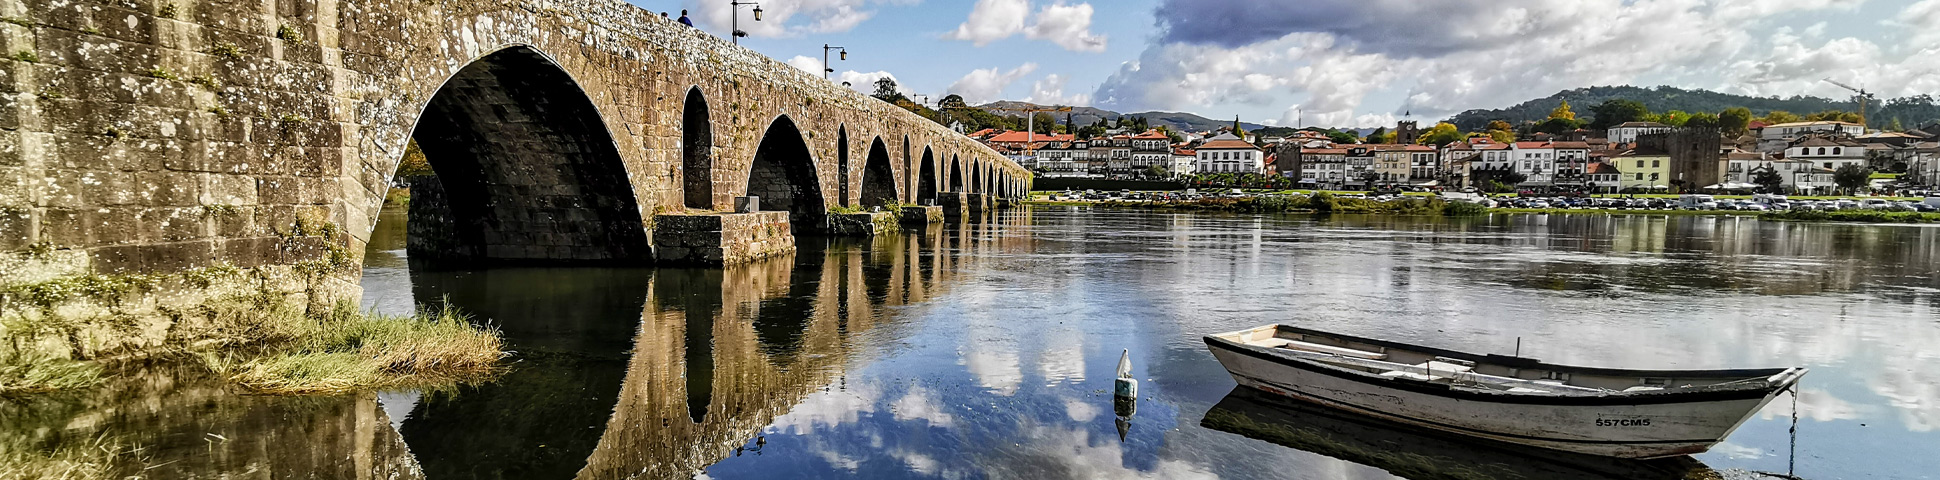 Guided Cycling The Portuguese Camino